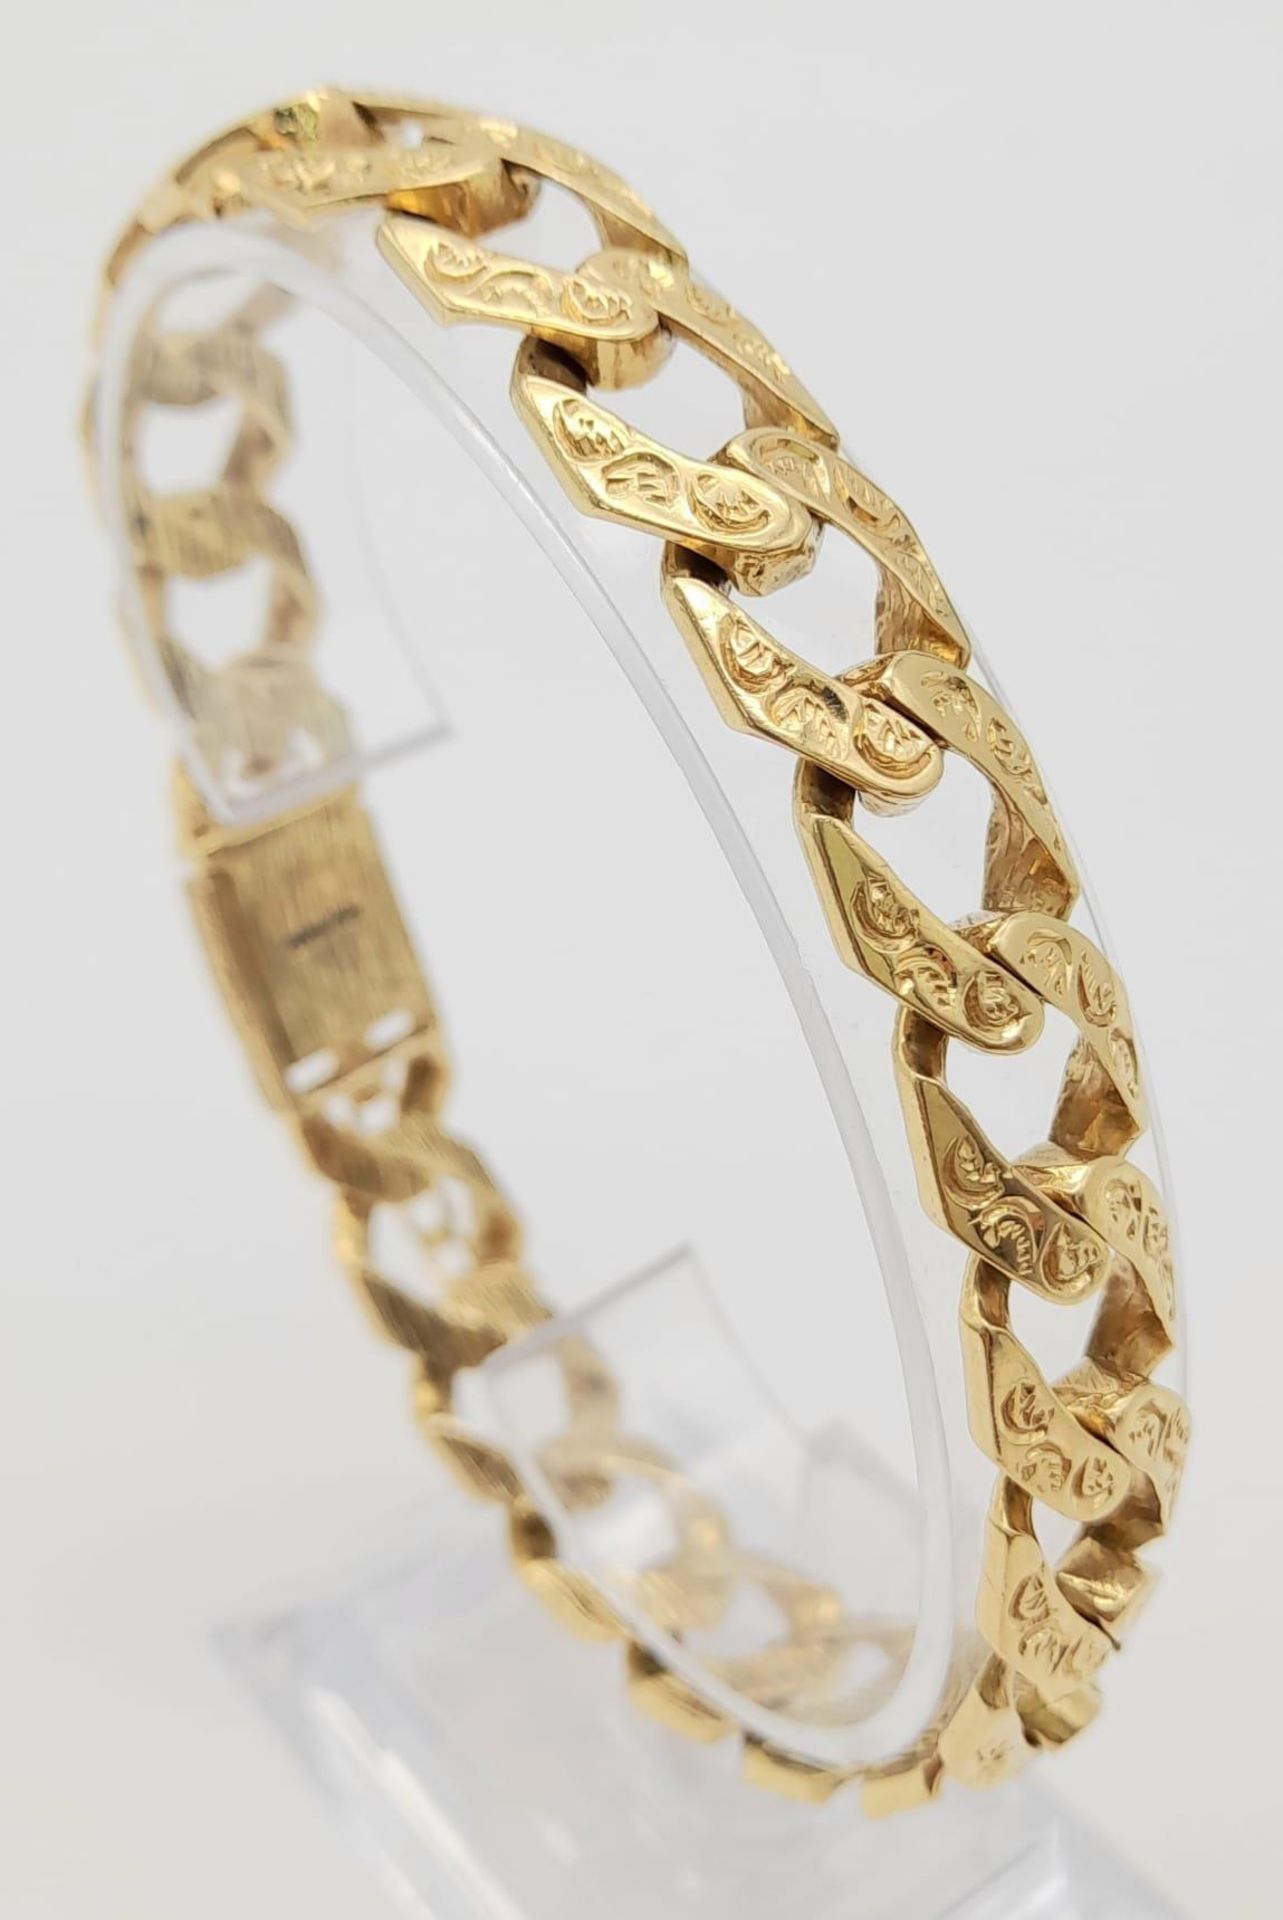 9k yellow gold heavy weight detailed curb bracelet, approx 24cm length, 48.5g weight - Image 4 of 5